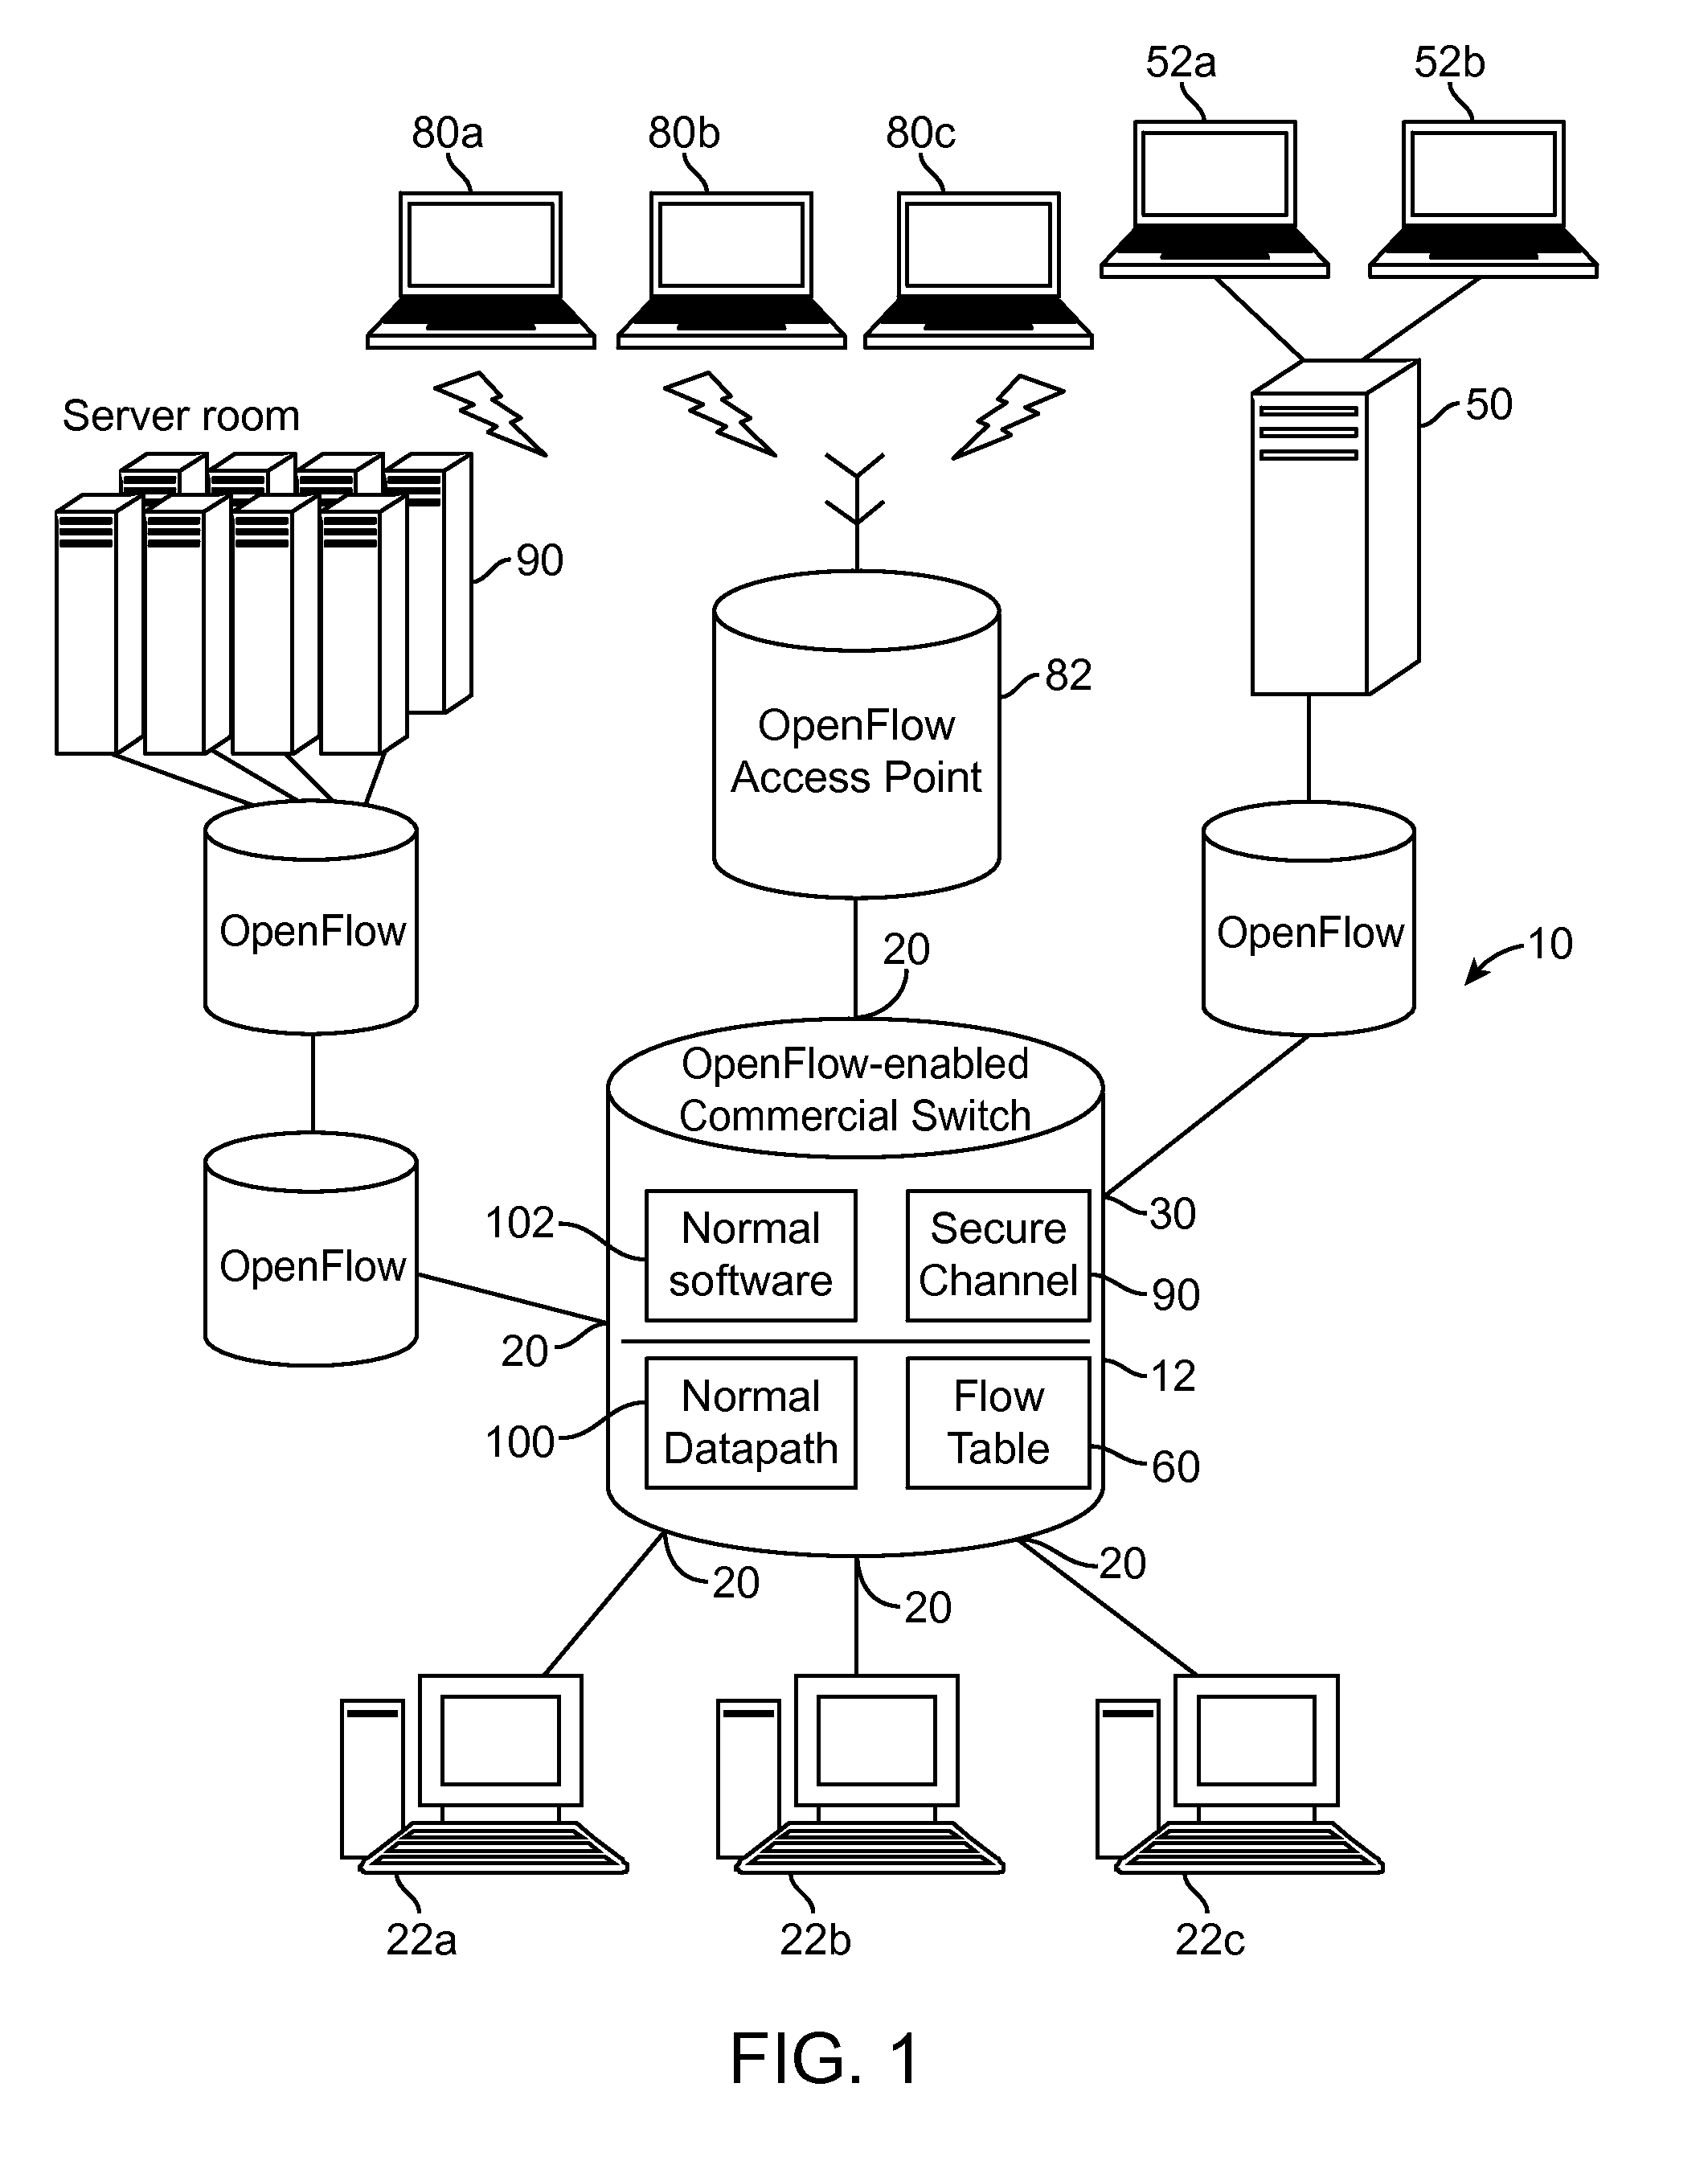 Traffic visibility in an open networking environment